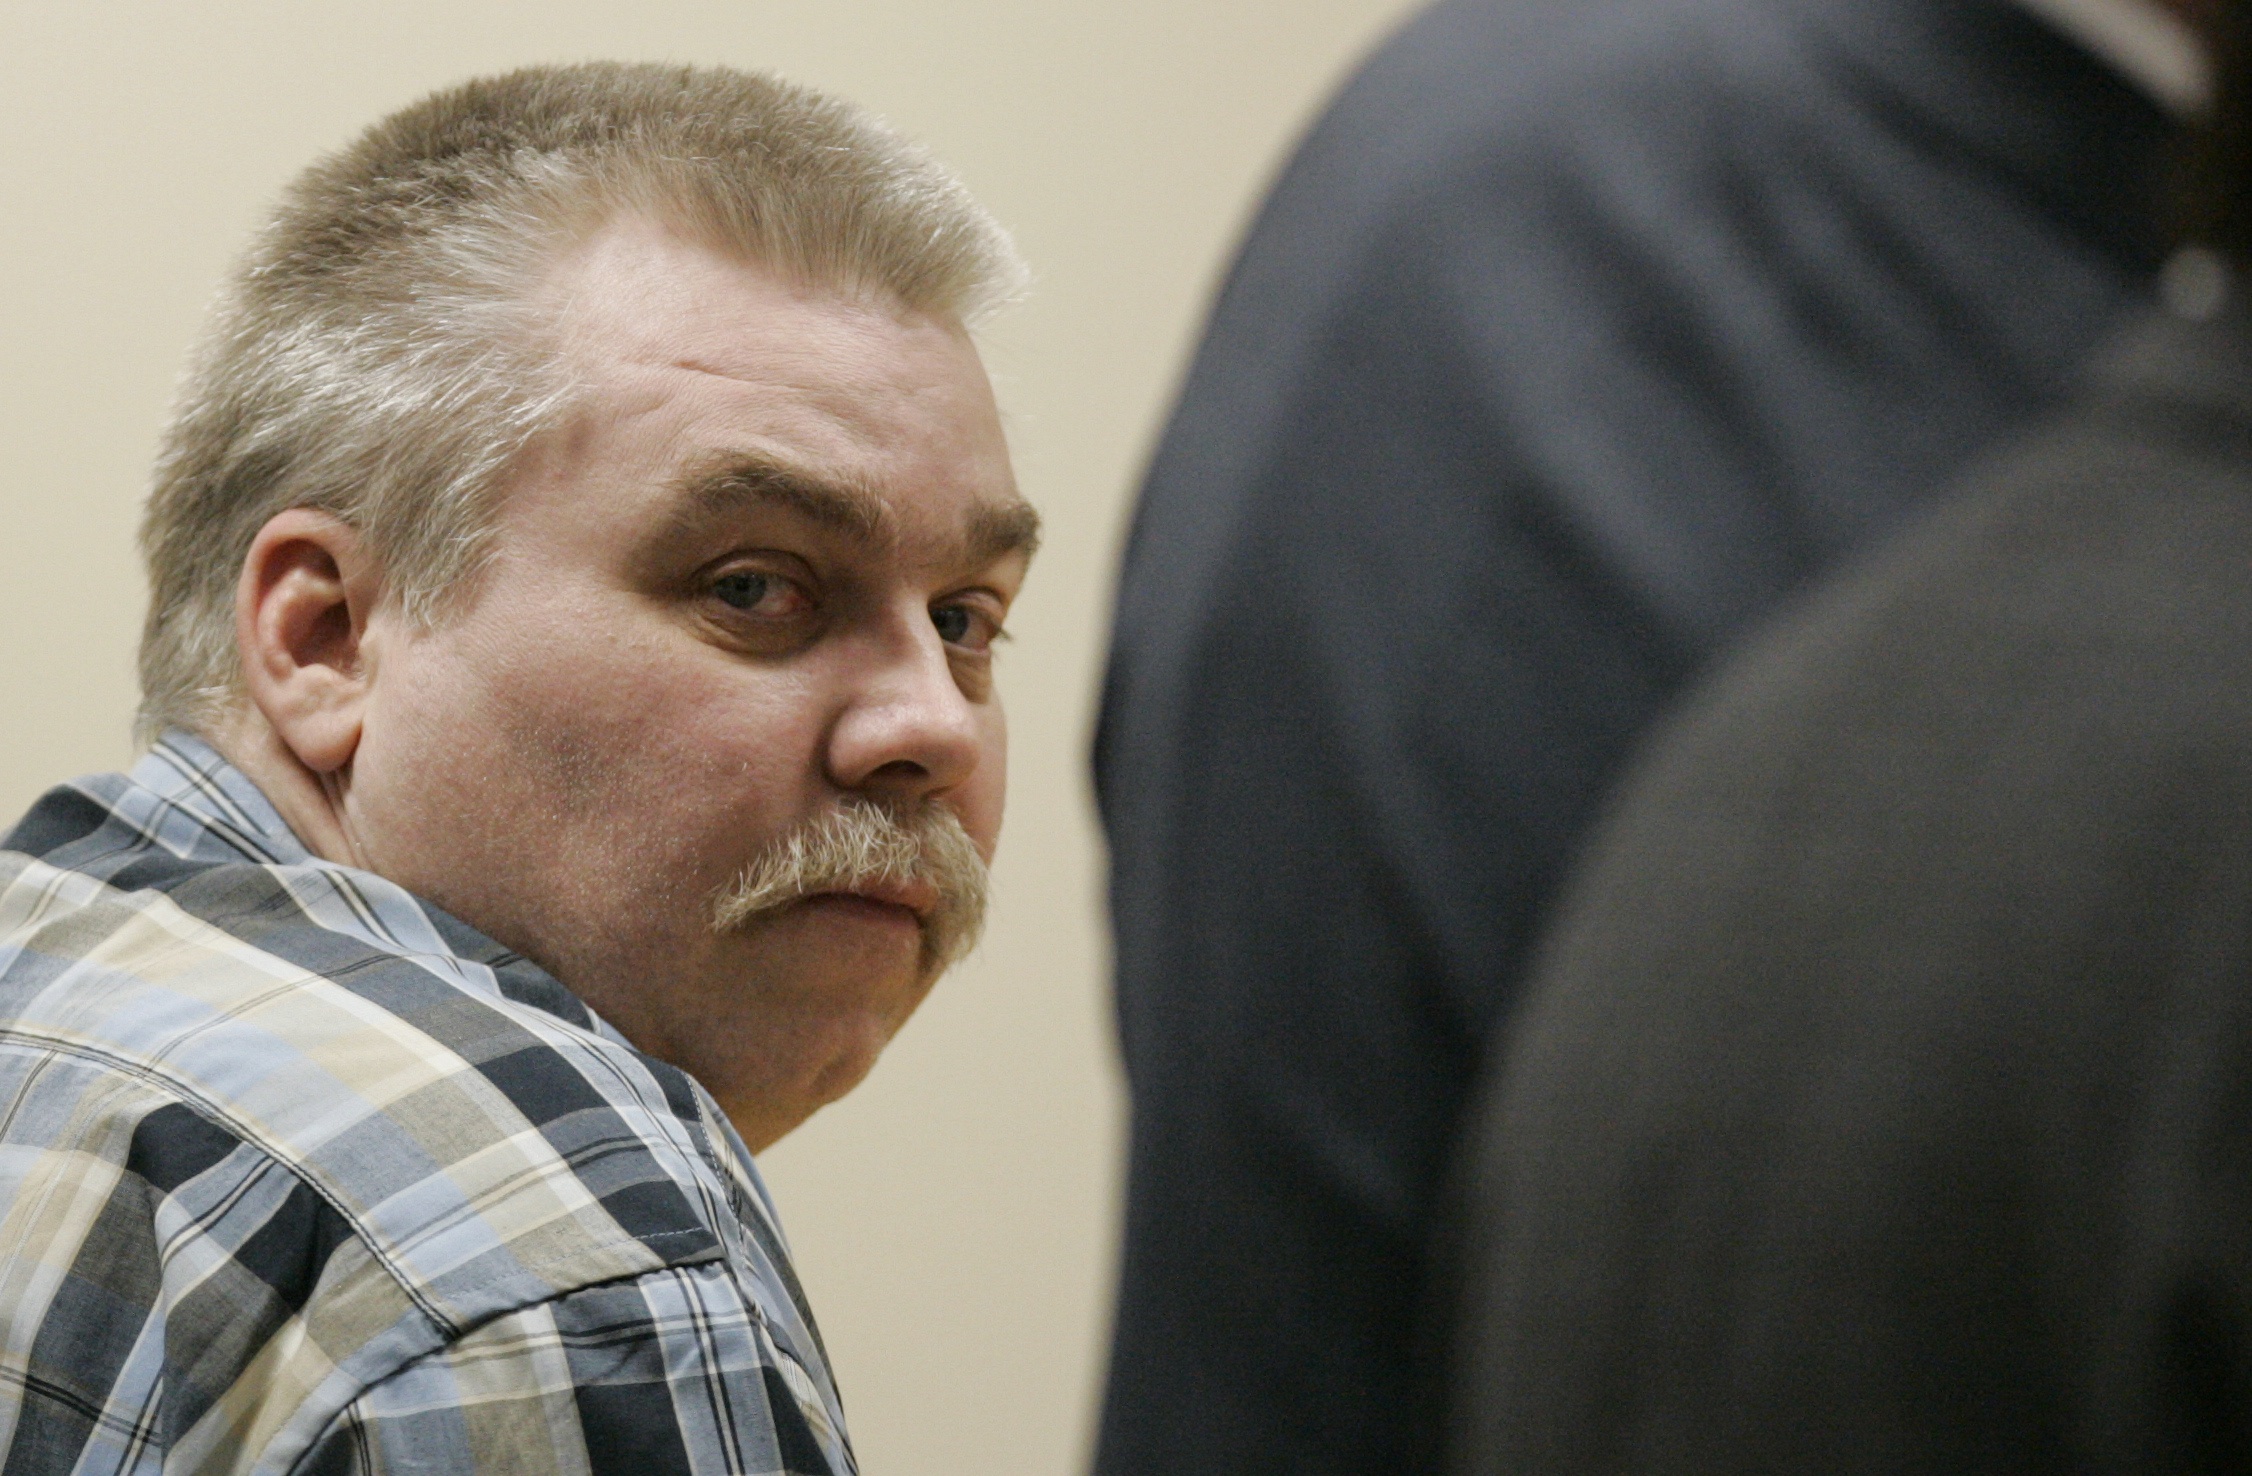 Judge Turns Down Steven Avery’s Request For New Trial